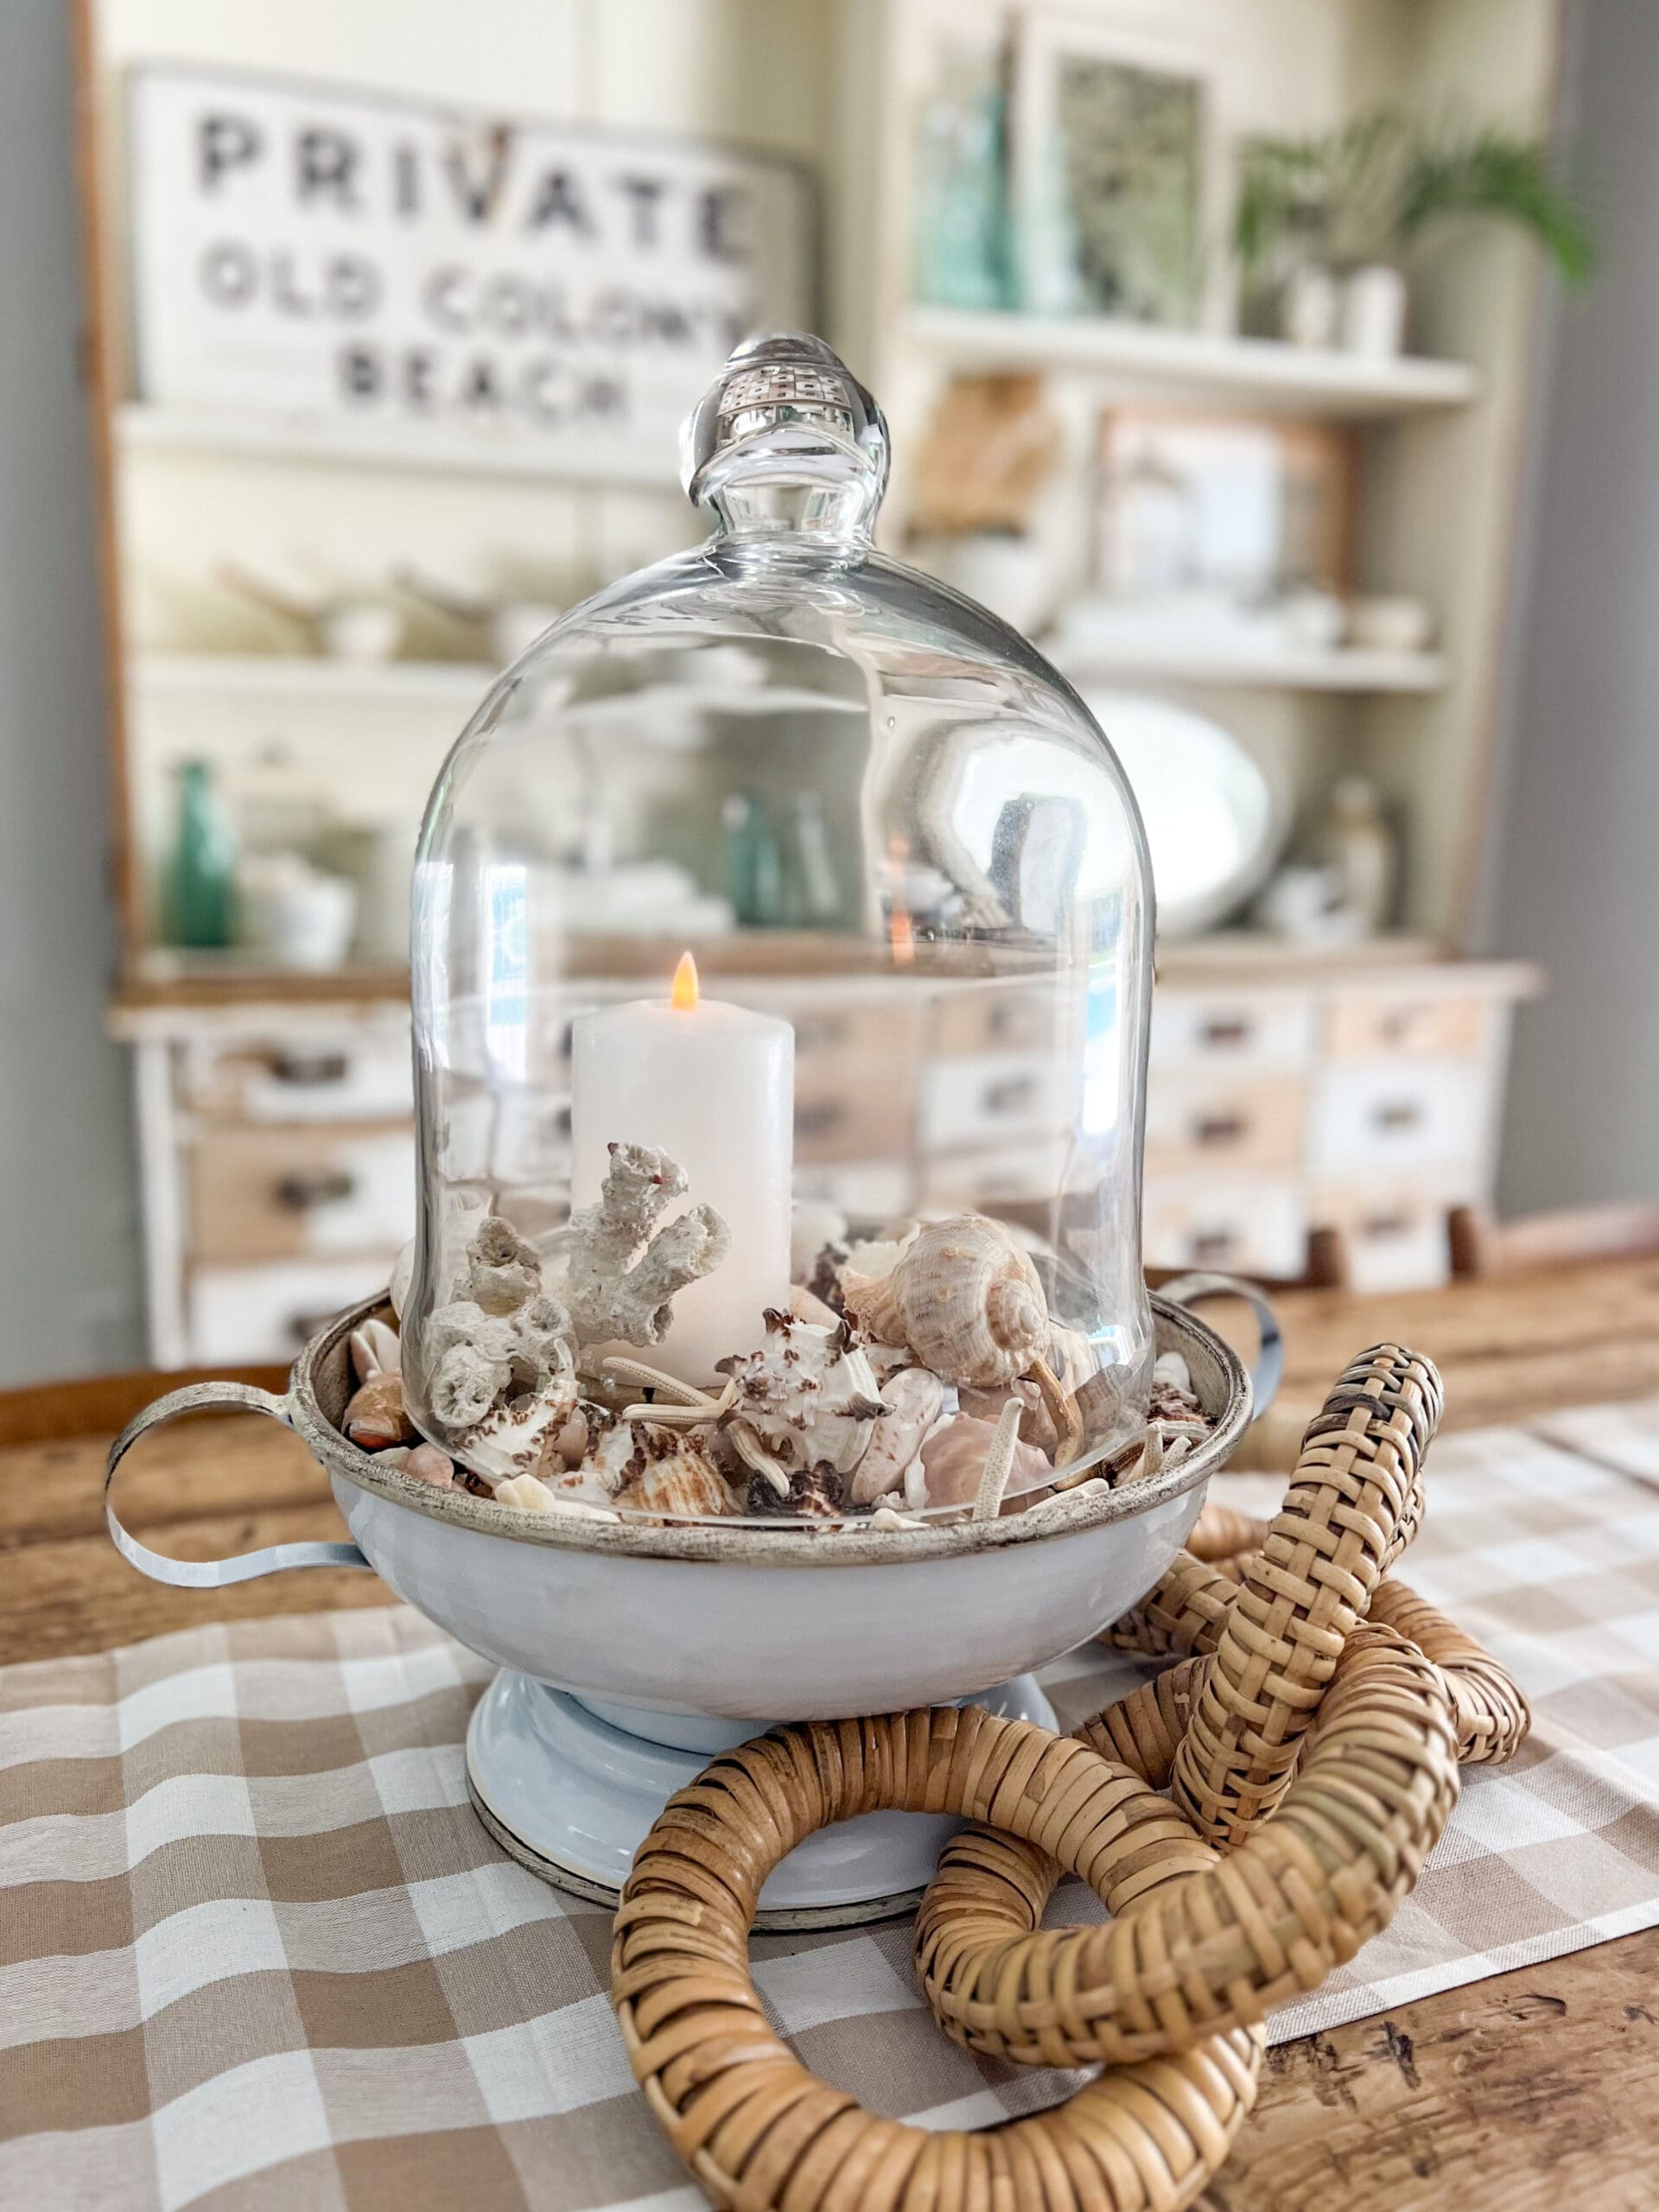 How to Decorate a Glass Cloche for Summer